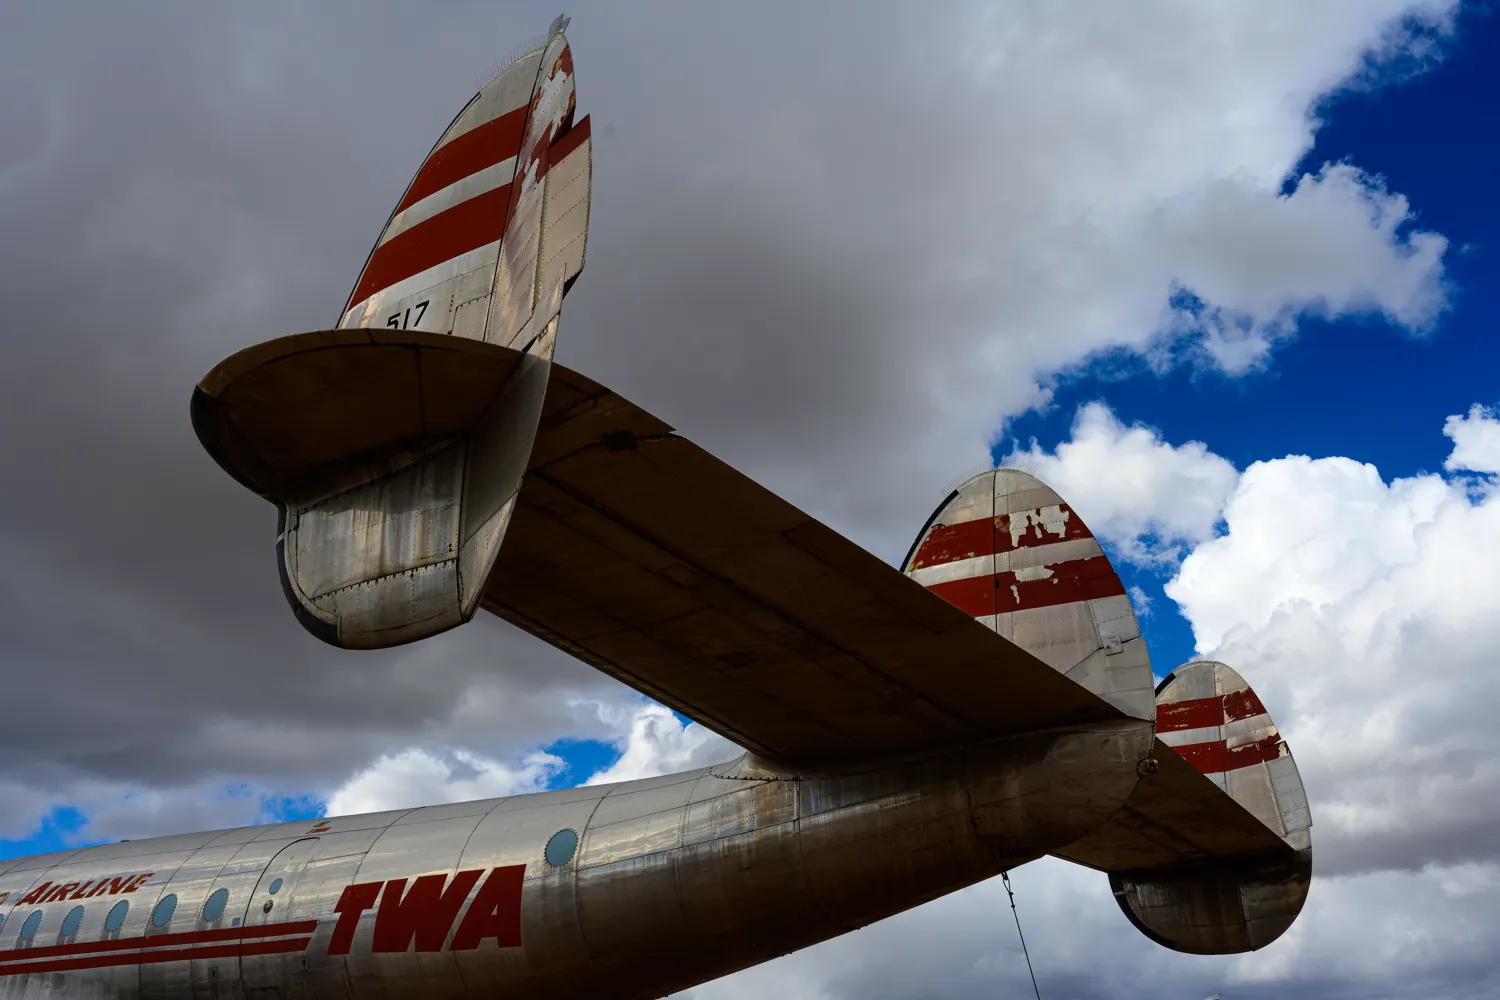 Lockheed L-049 Constellation at the Pima Air & Space Museum